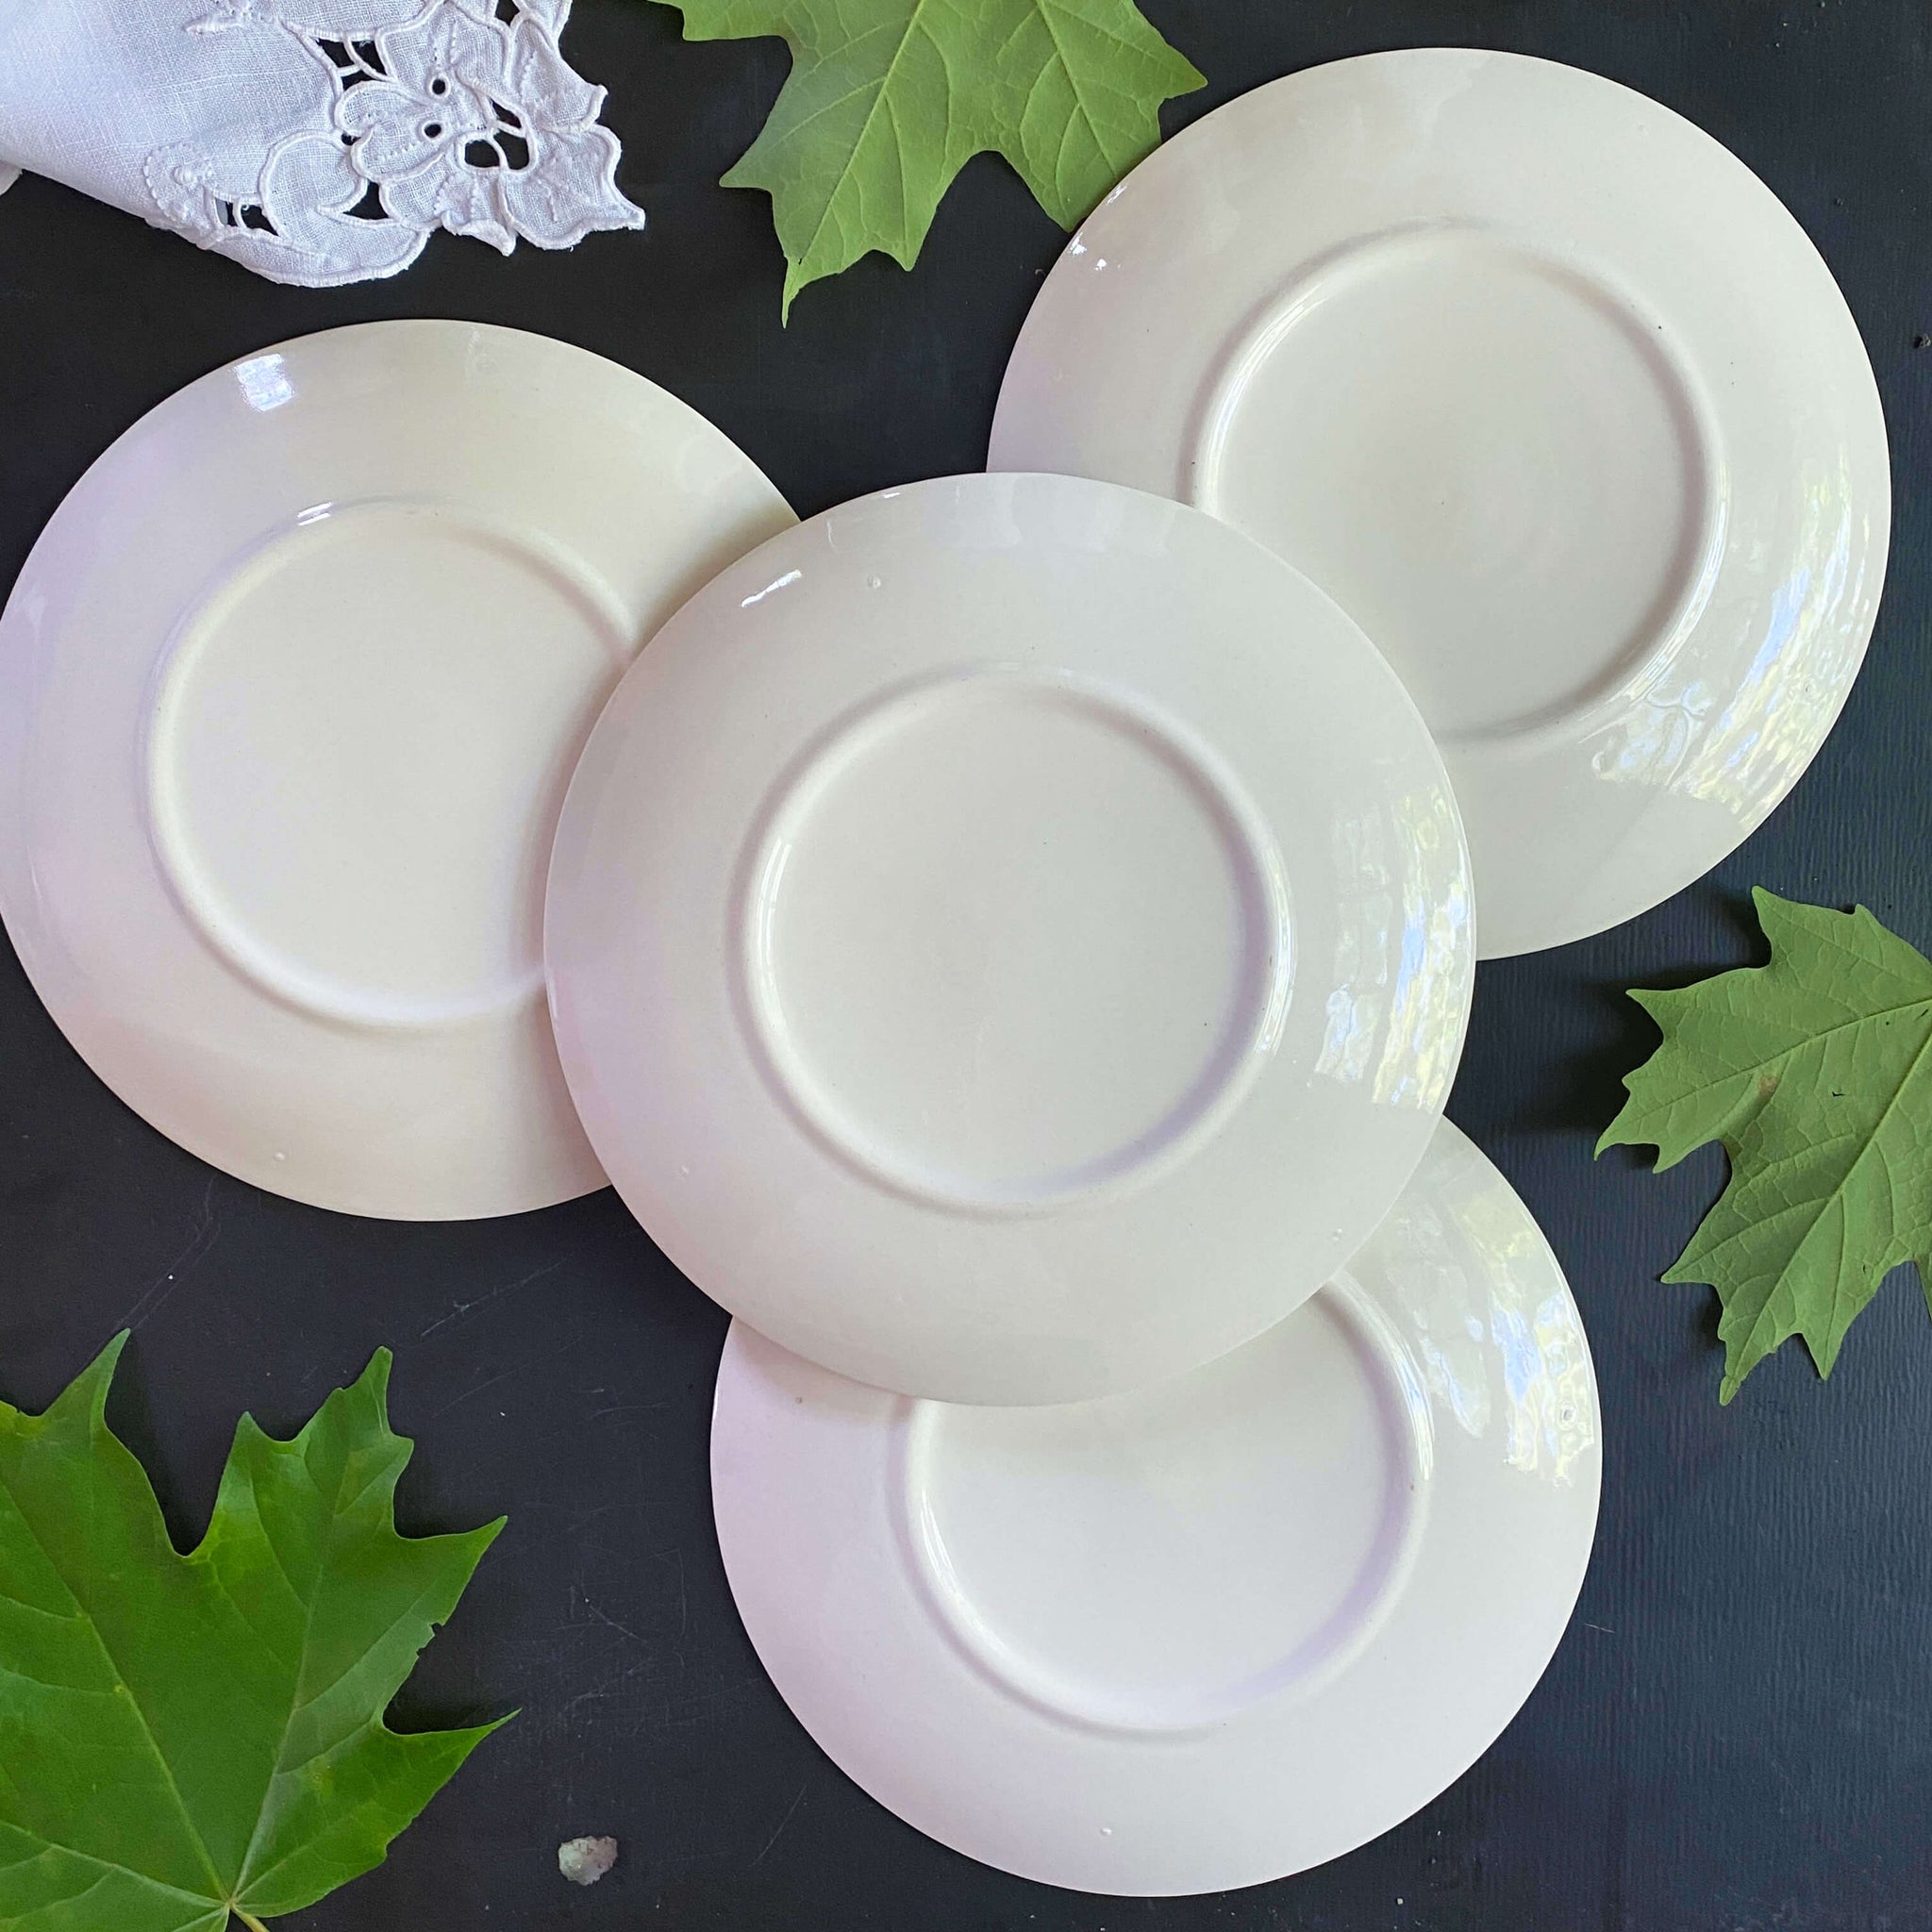 Vintage Maple Leaf Bread and Butter Plates by Salem China Co circa 1960s